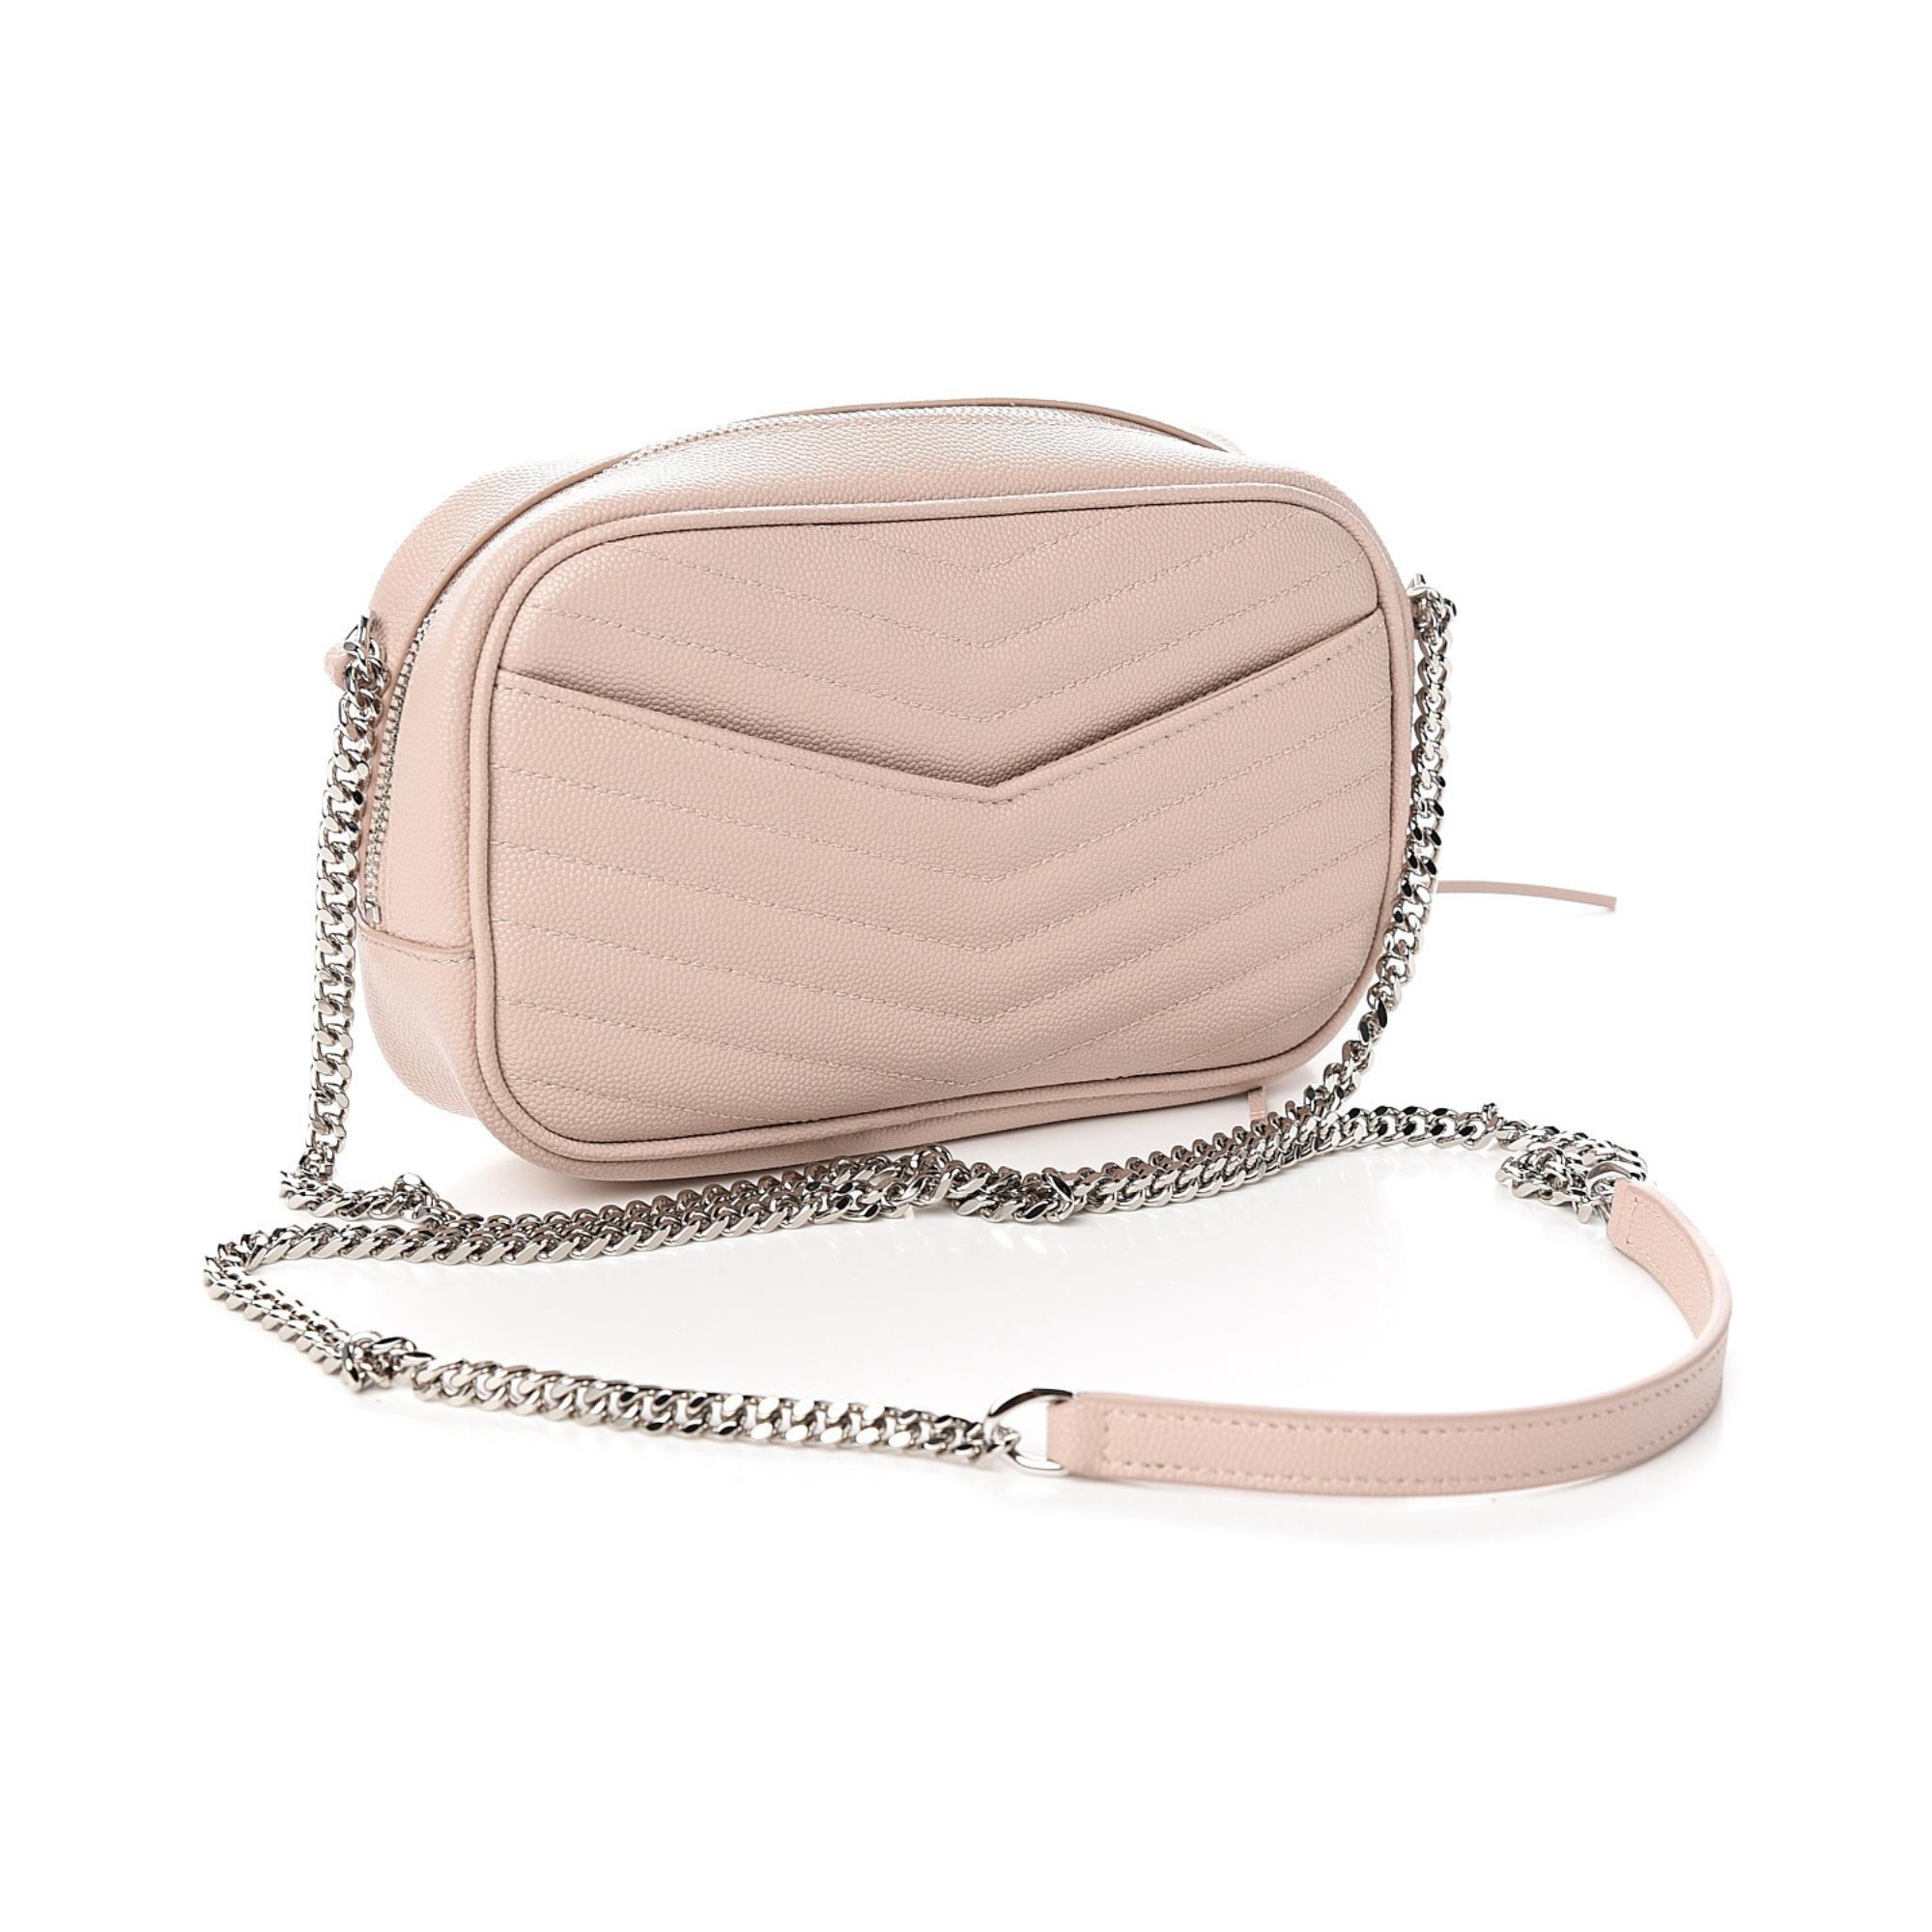 This shoulder bag is made of chevron-quilted calfskin leather in marble pink. The bag features a gold chain link shoulder strap, and a matching gold YSL monogram detail on the front. The tasseled wrap-around zipper opens to a compact black leather